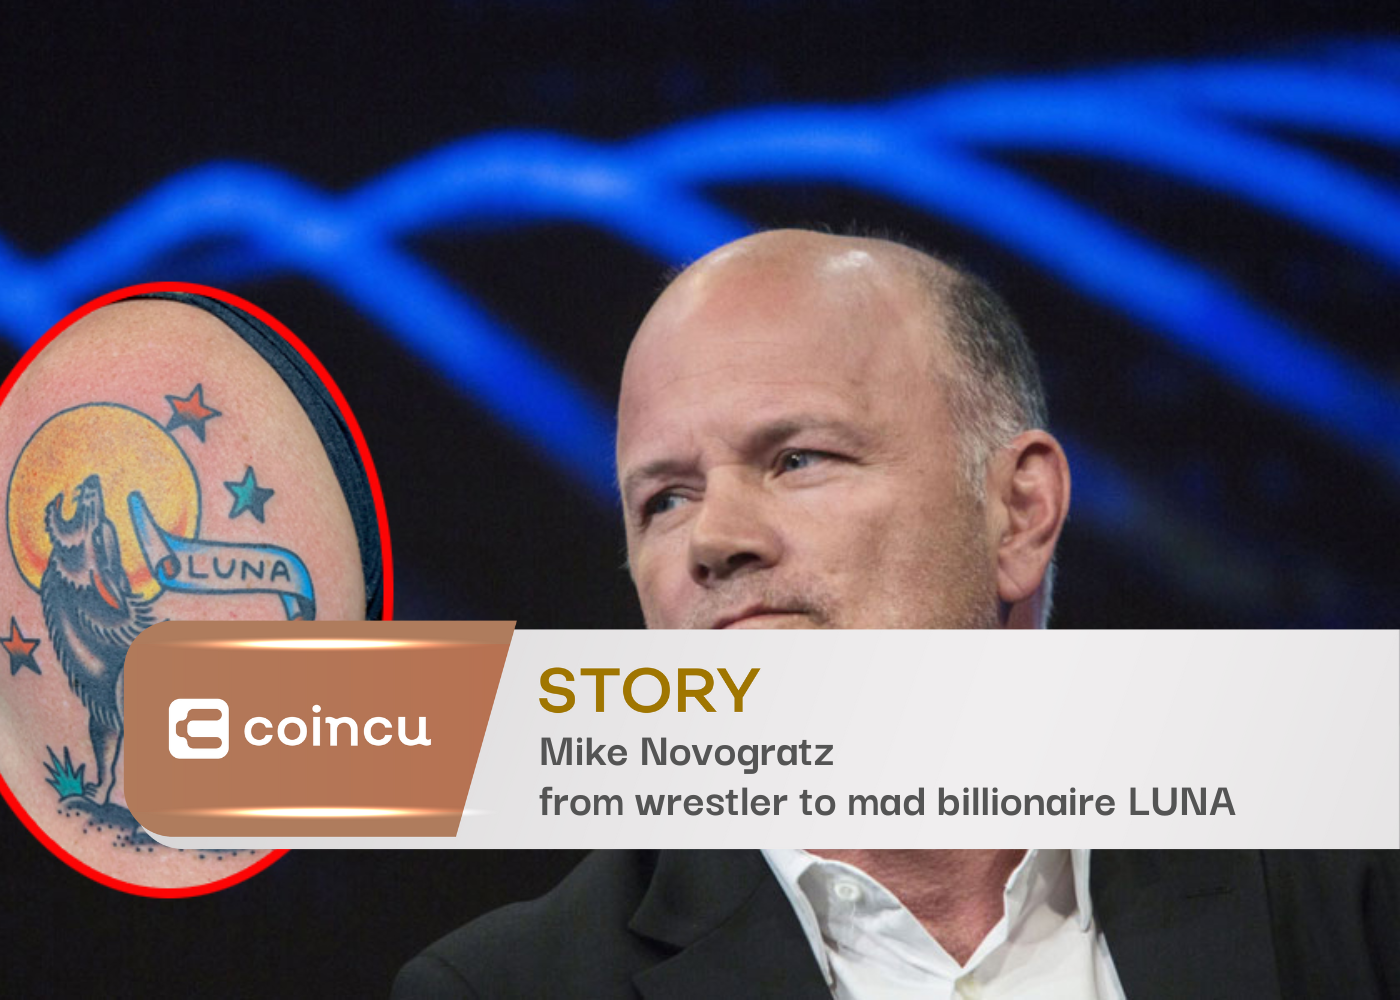 What have we learned from LUNA Laughing at Novogratz To hll with POS  down with all chitcoins  MAYBE EVEN ETH